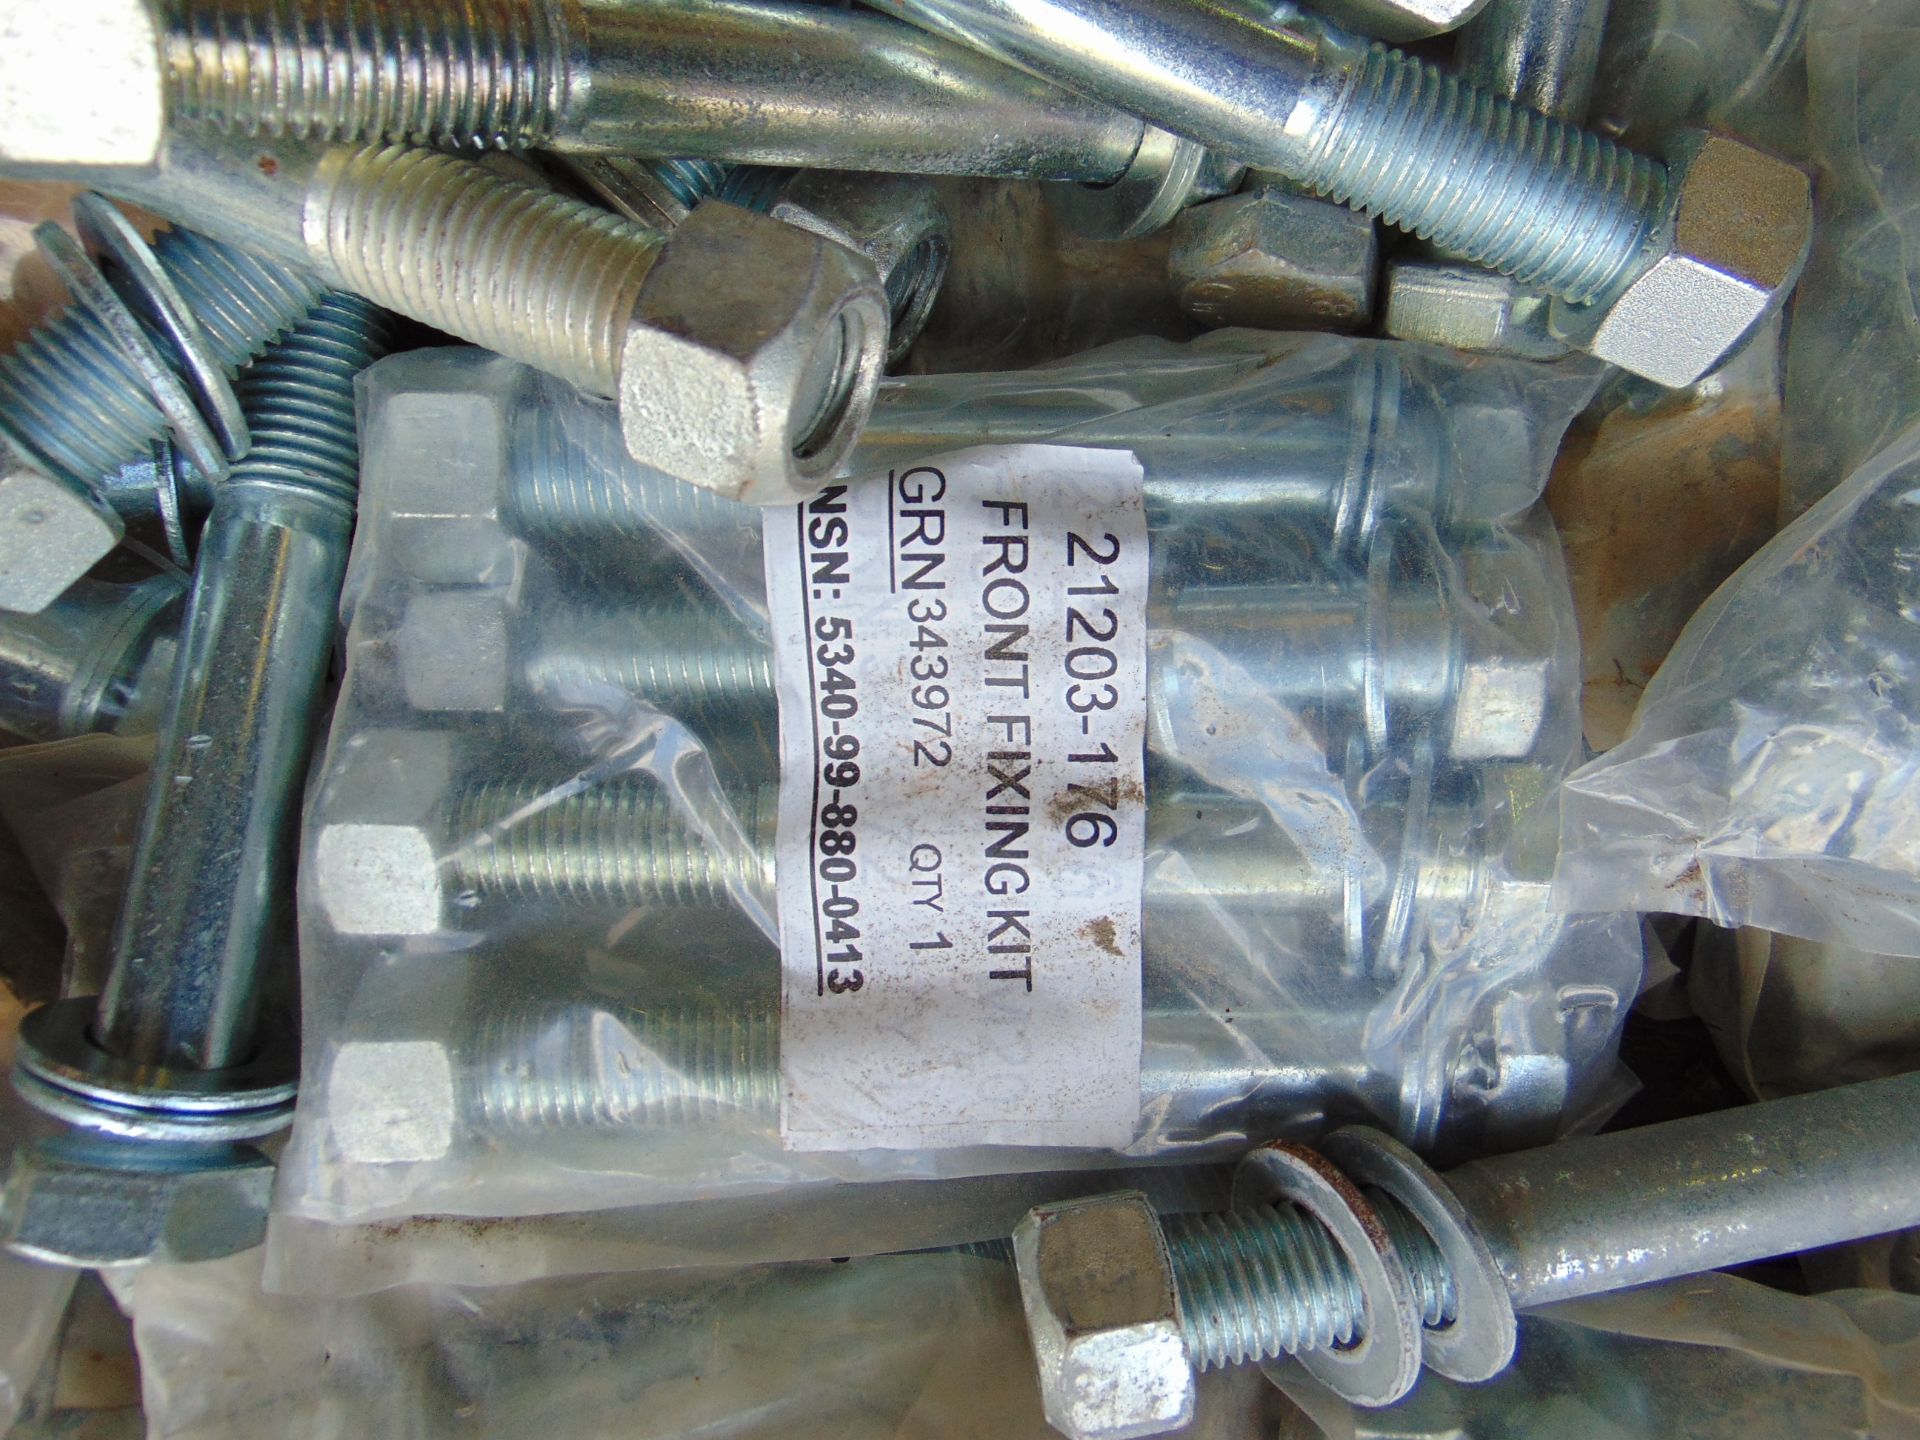 Approx. 250 M20 x 150 Grade 8.8 Bolts, Washers & Nuts - Image 3 of 4